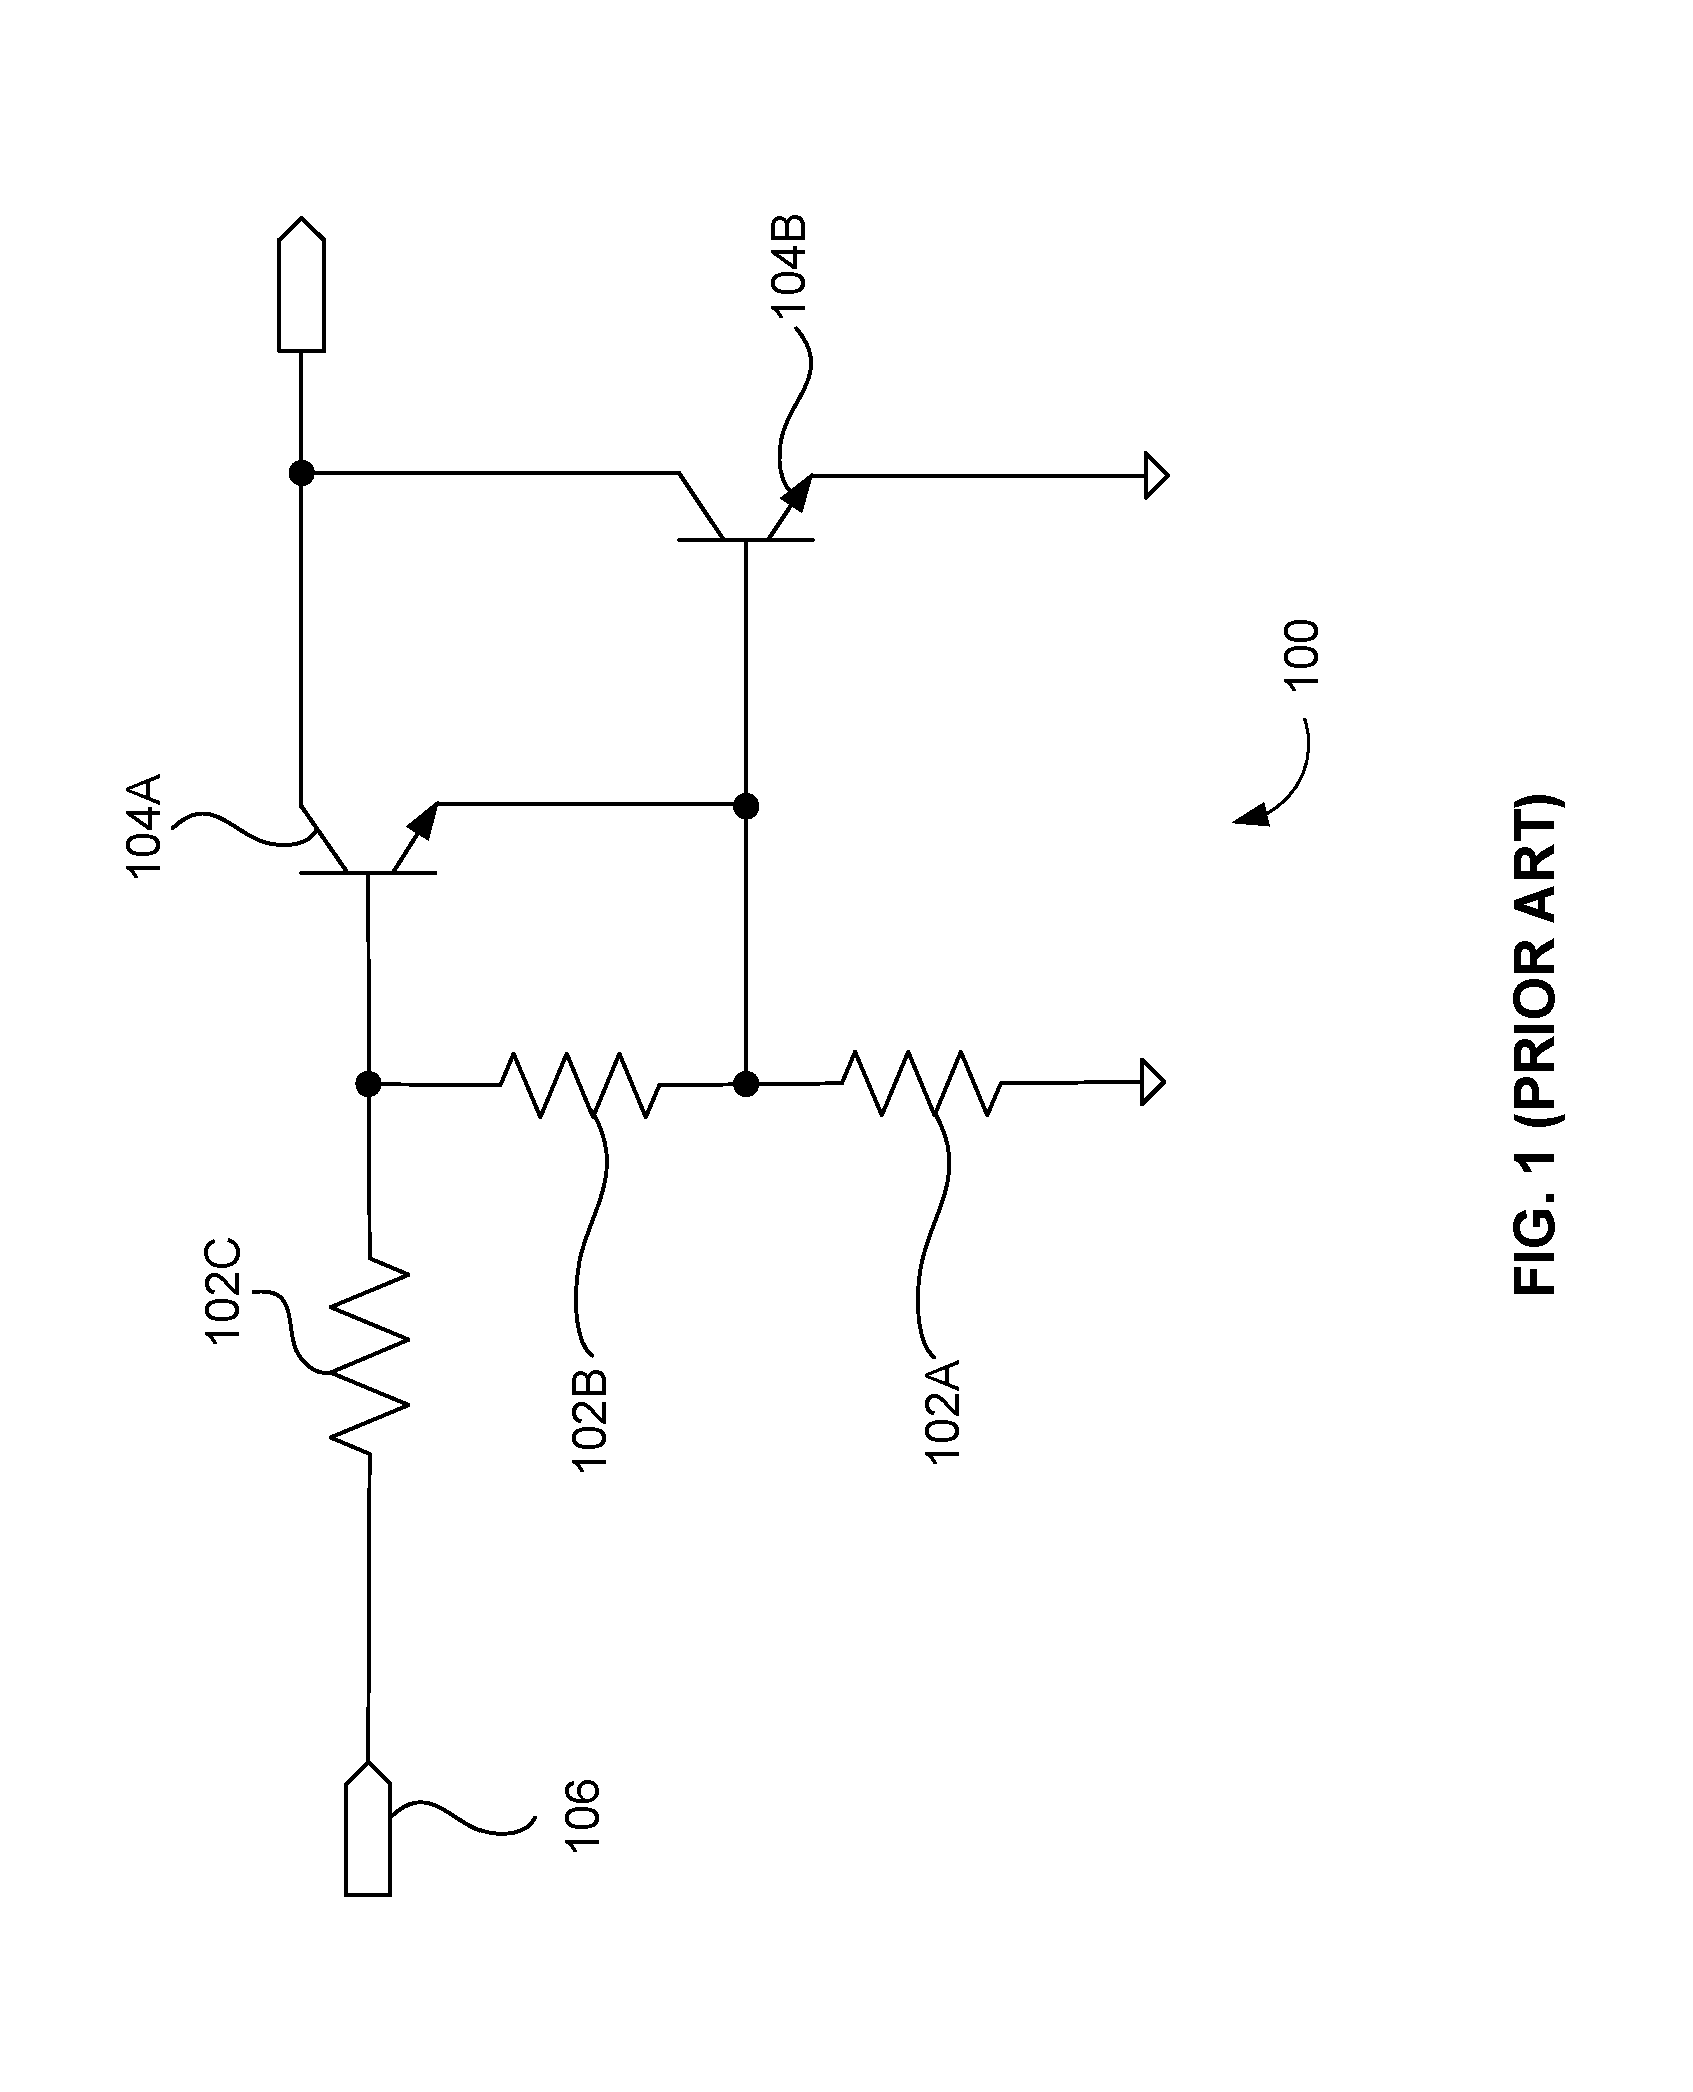 Configuration of jfet for base drive bipolar junction transistor with automatic compensation of beta variation